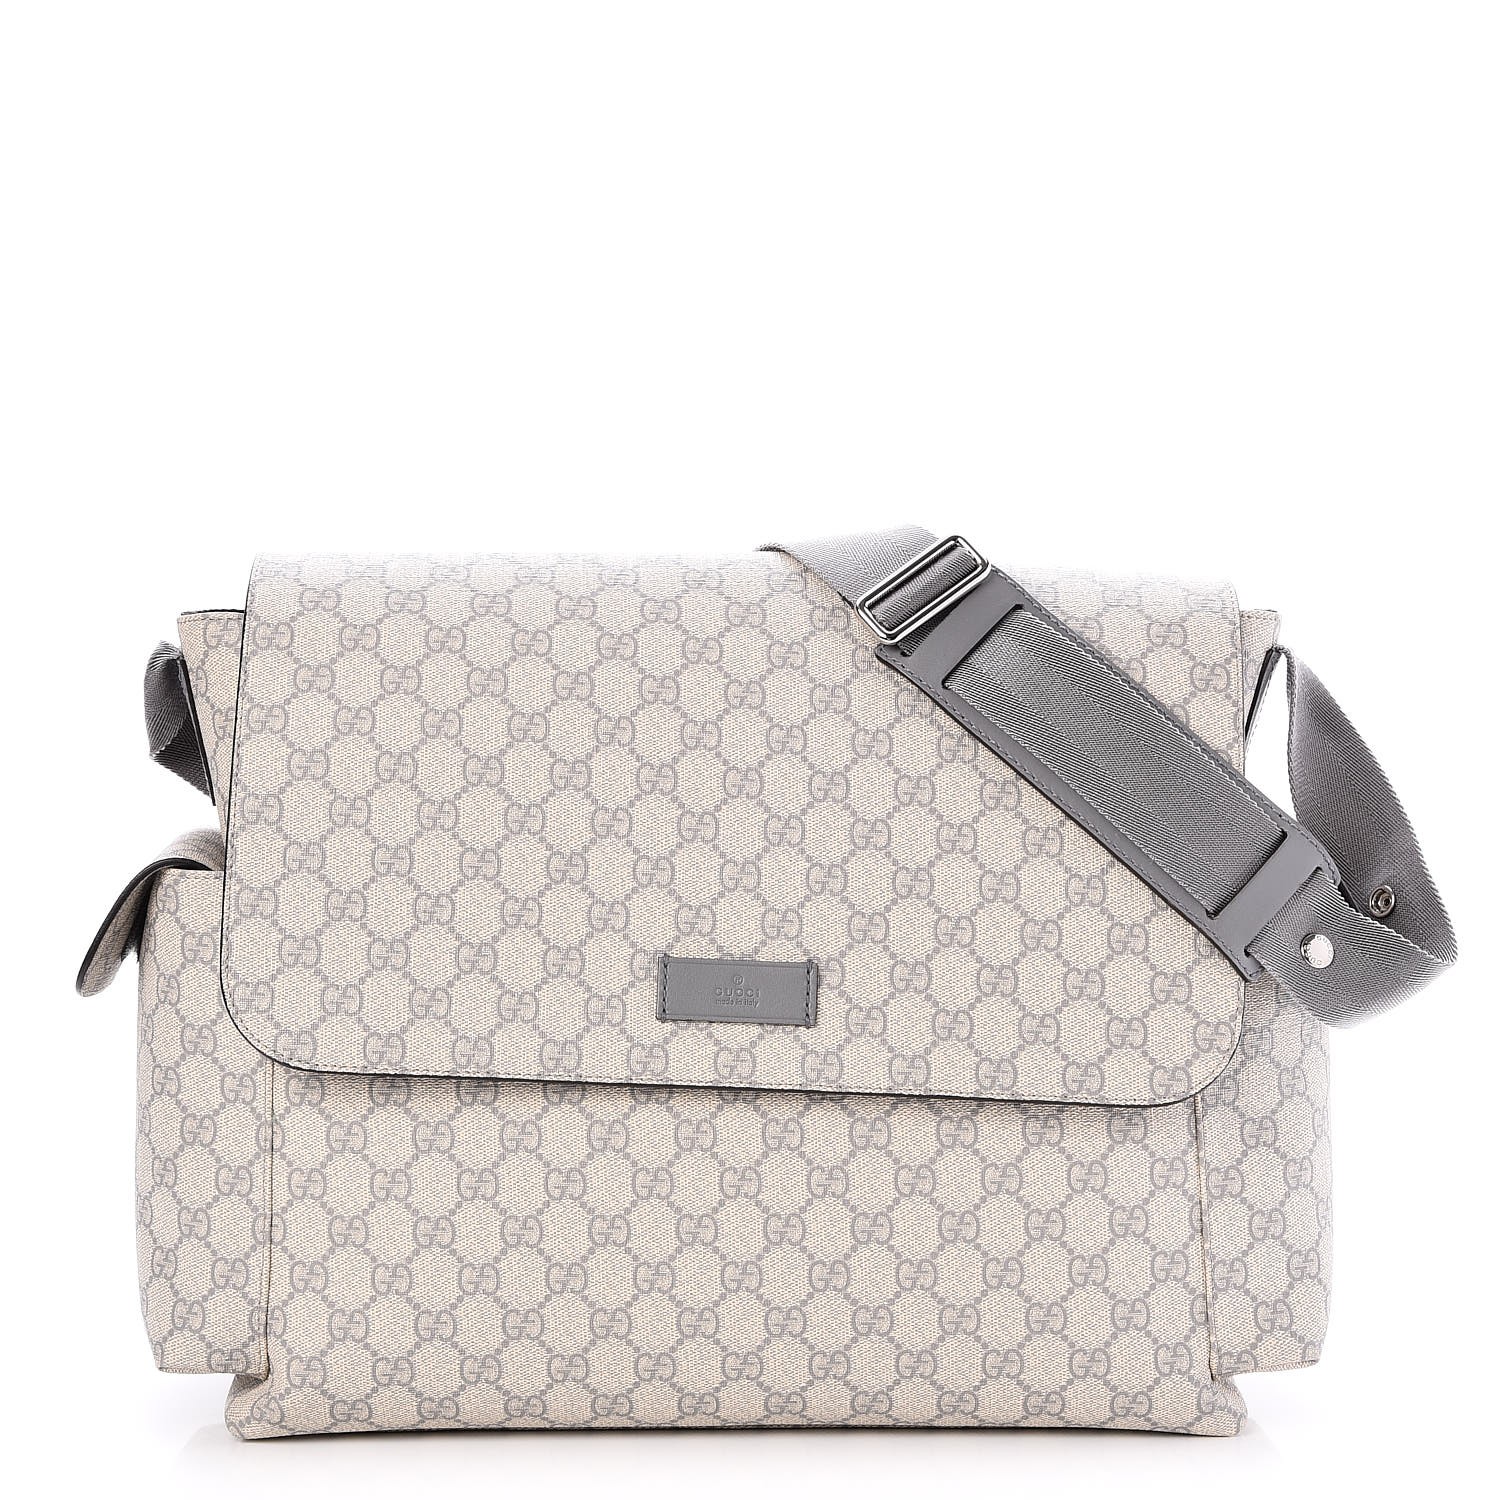 gucci diaper bag outlet, OFF 73%,www 